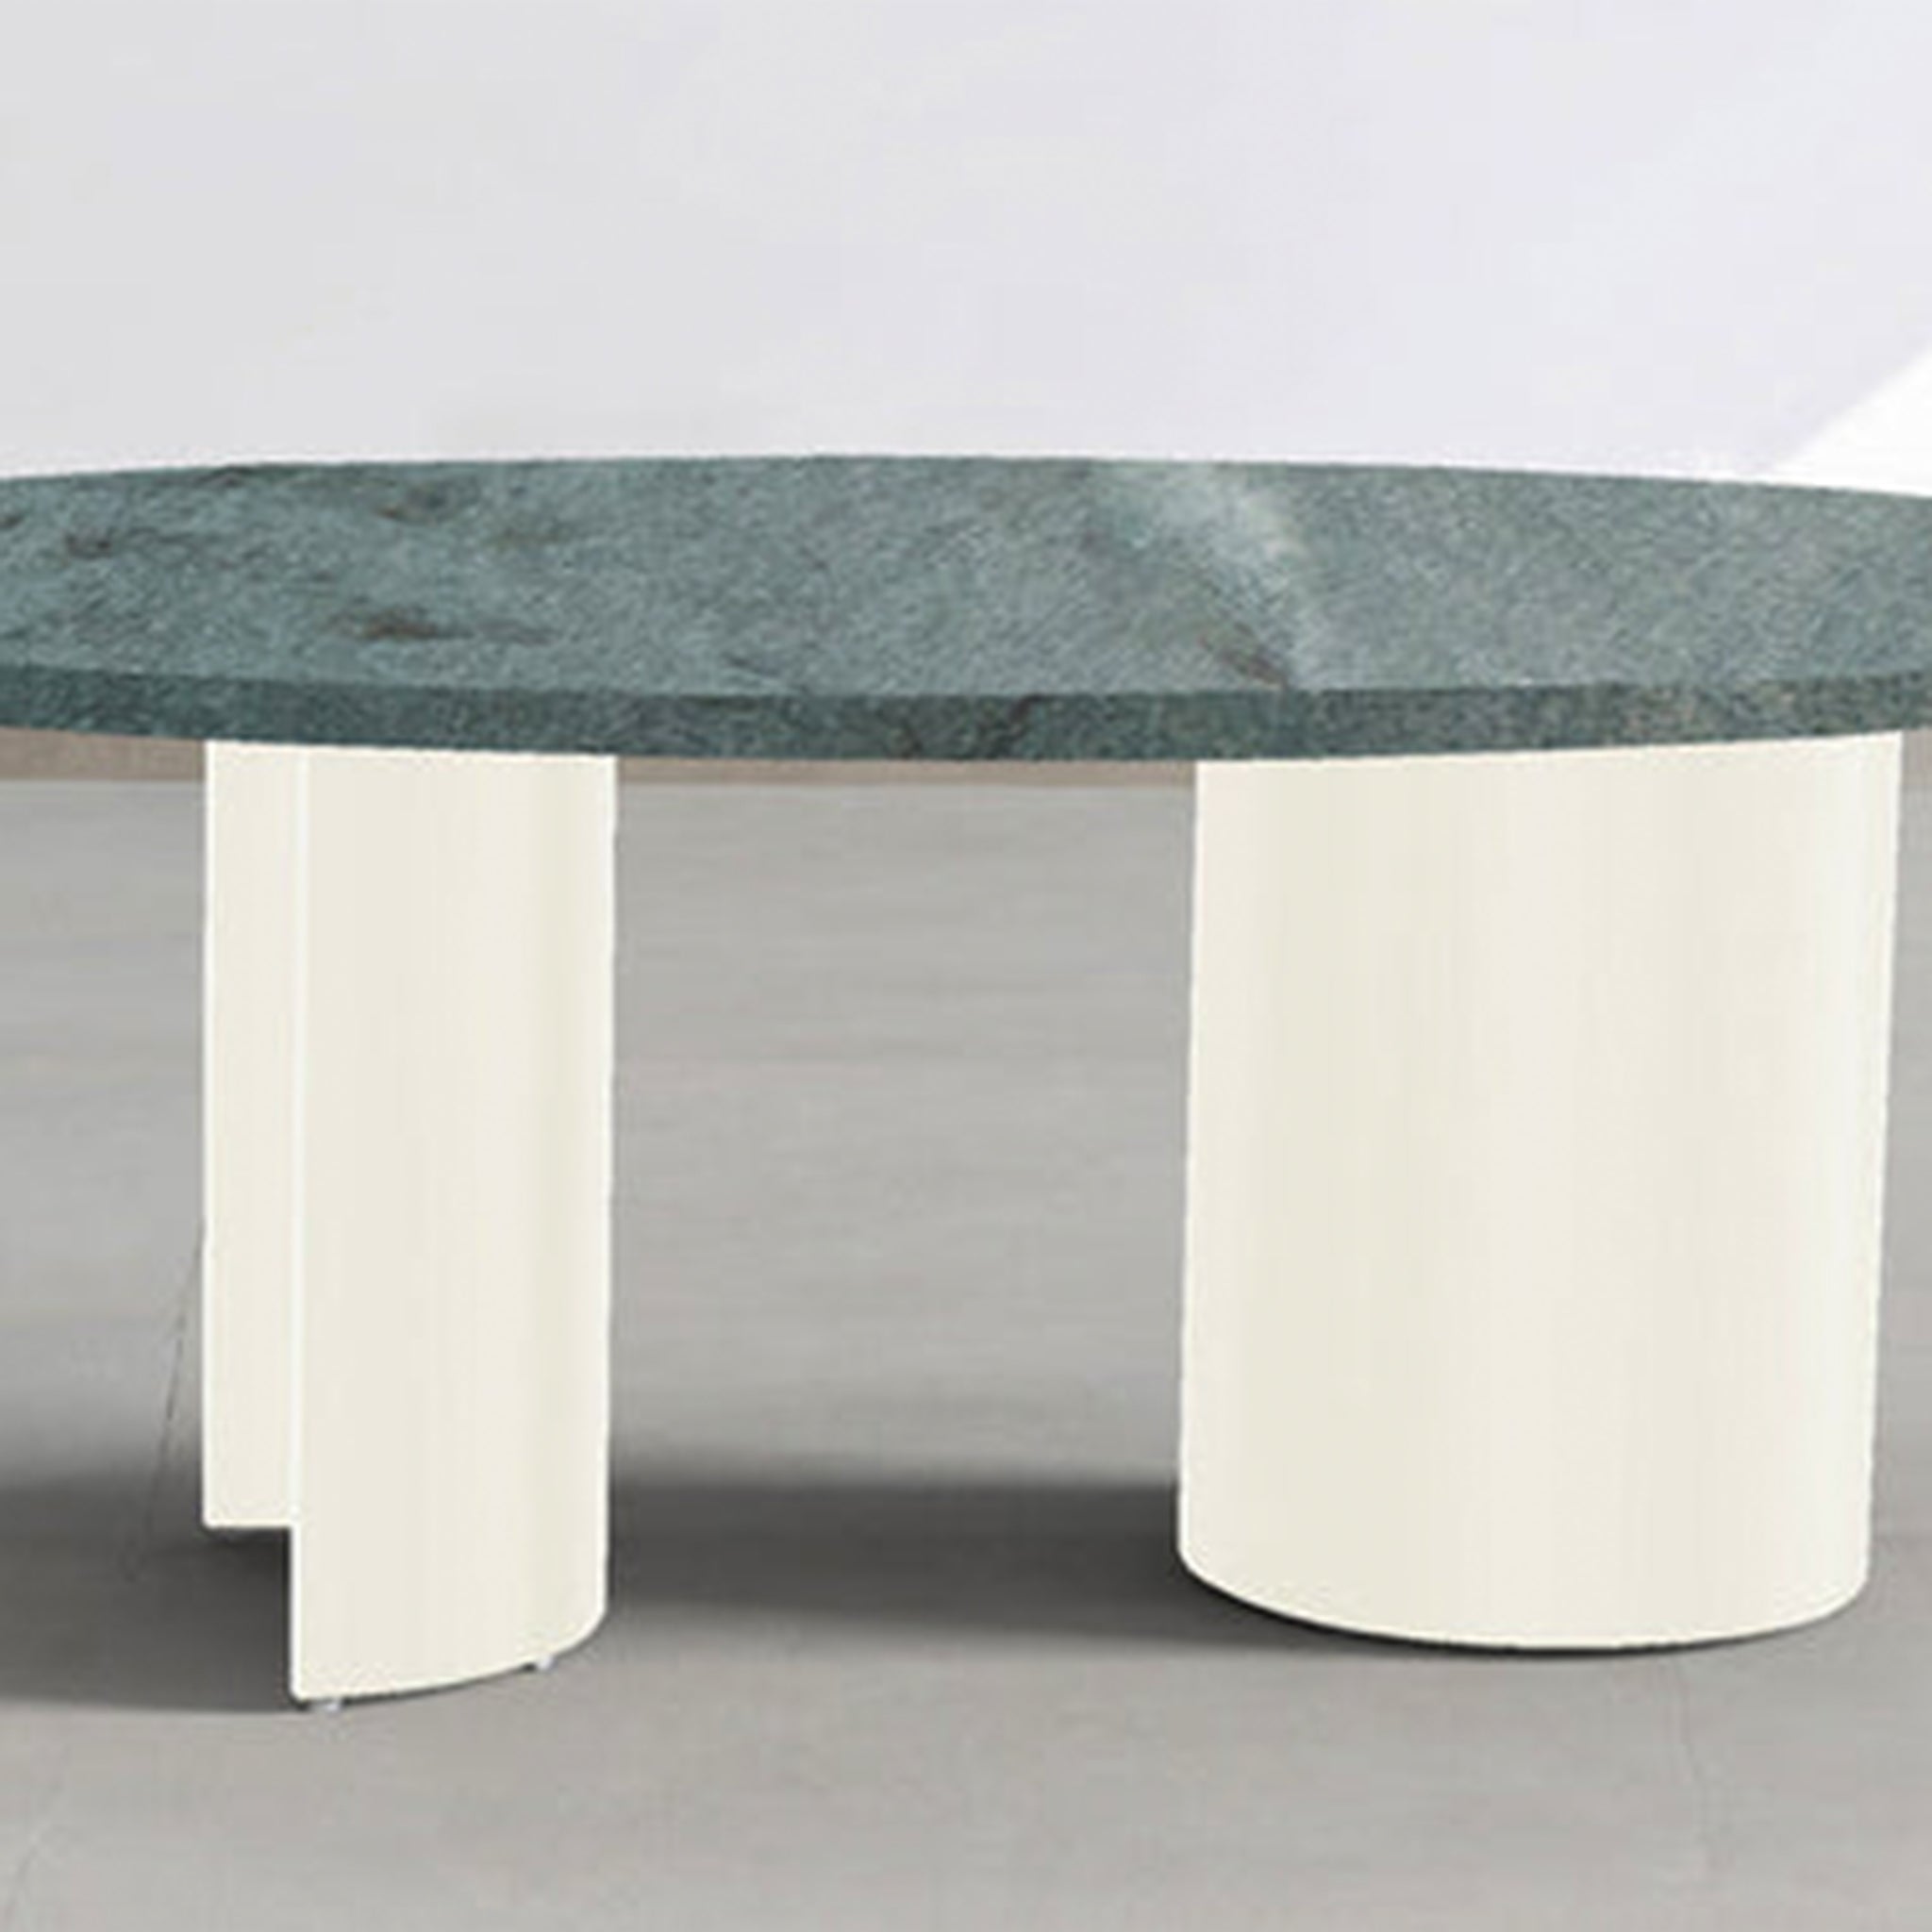 Solid Marble Table: 2cm thick edge ensures exceptional durability.